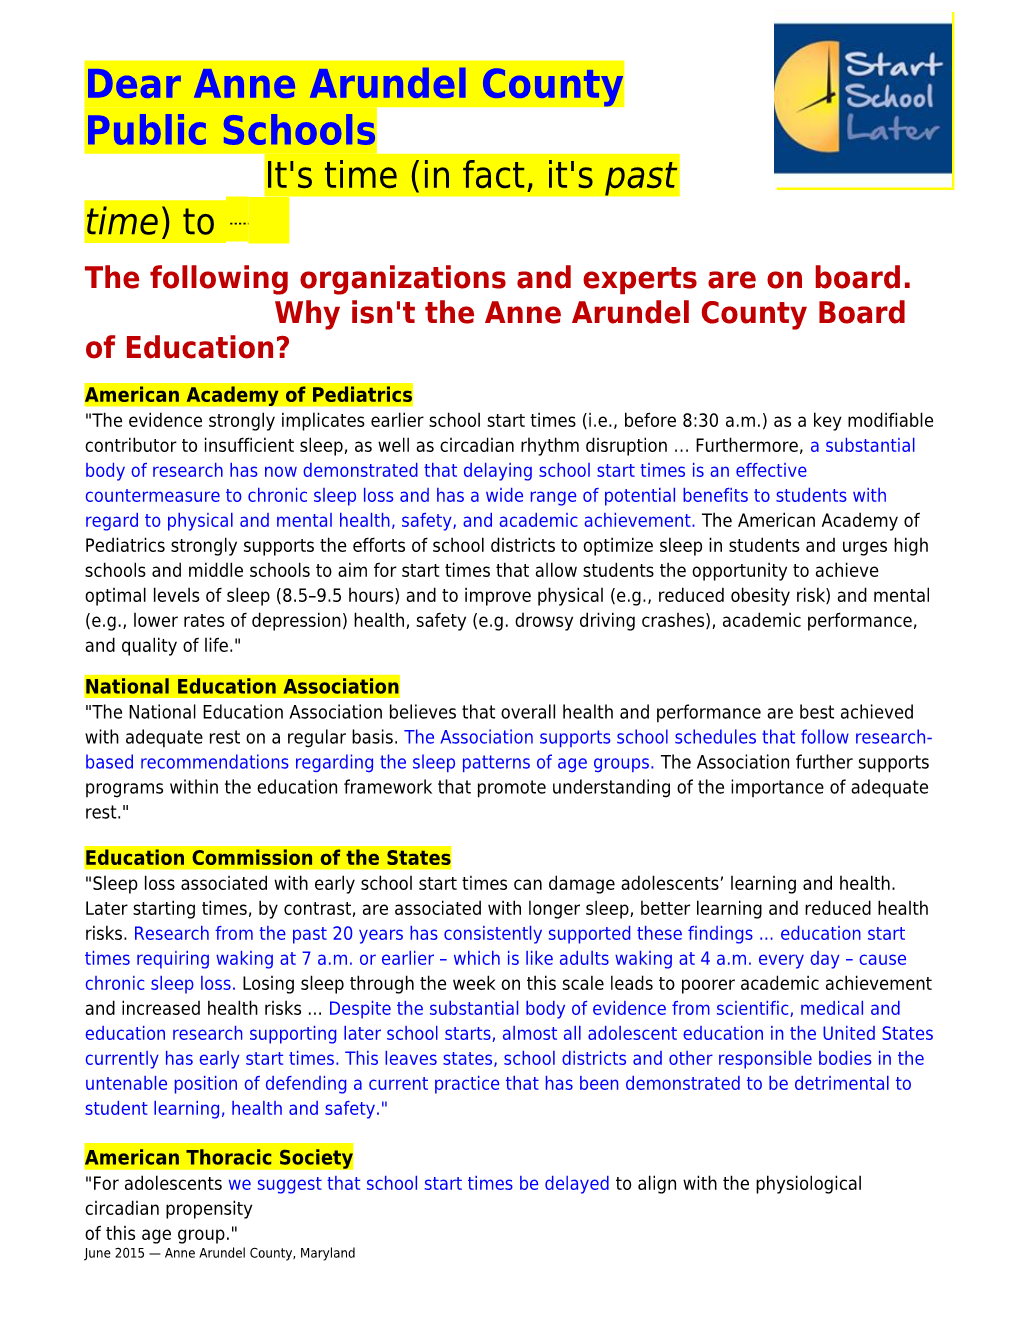 The Following Organizations and Experts Are on Board. Why Isn't the Anne Arundel County